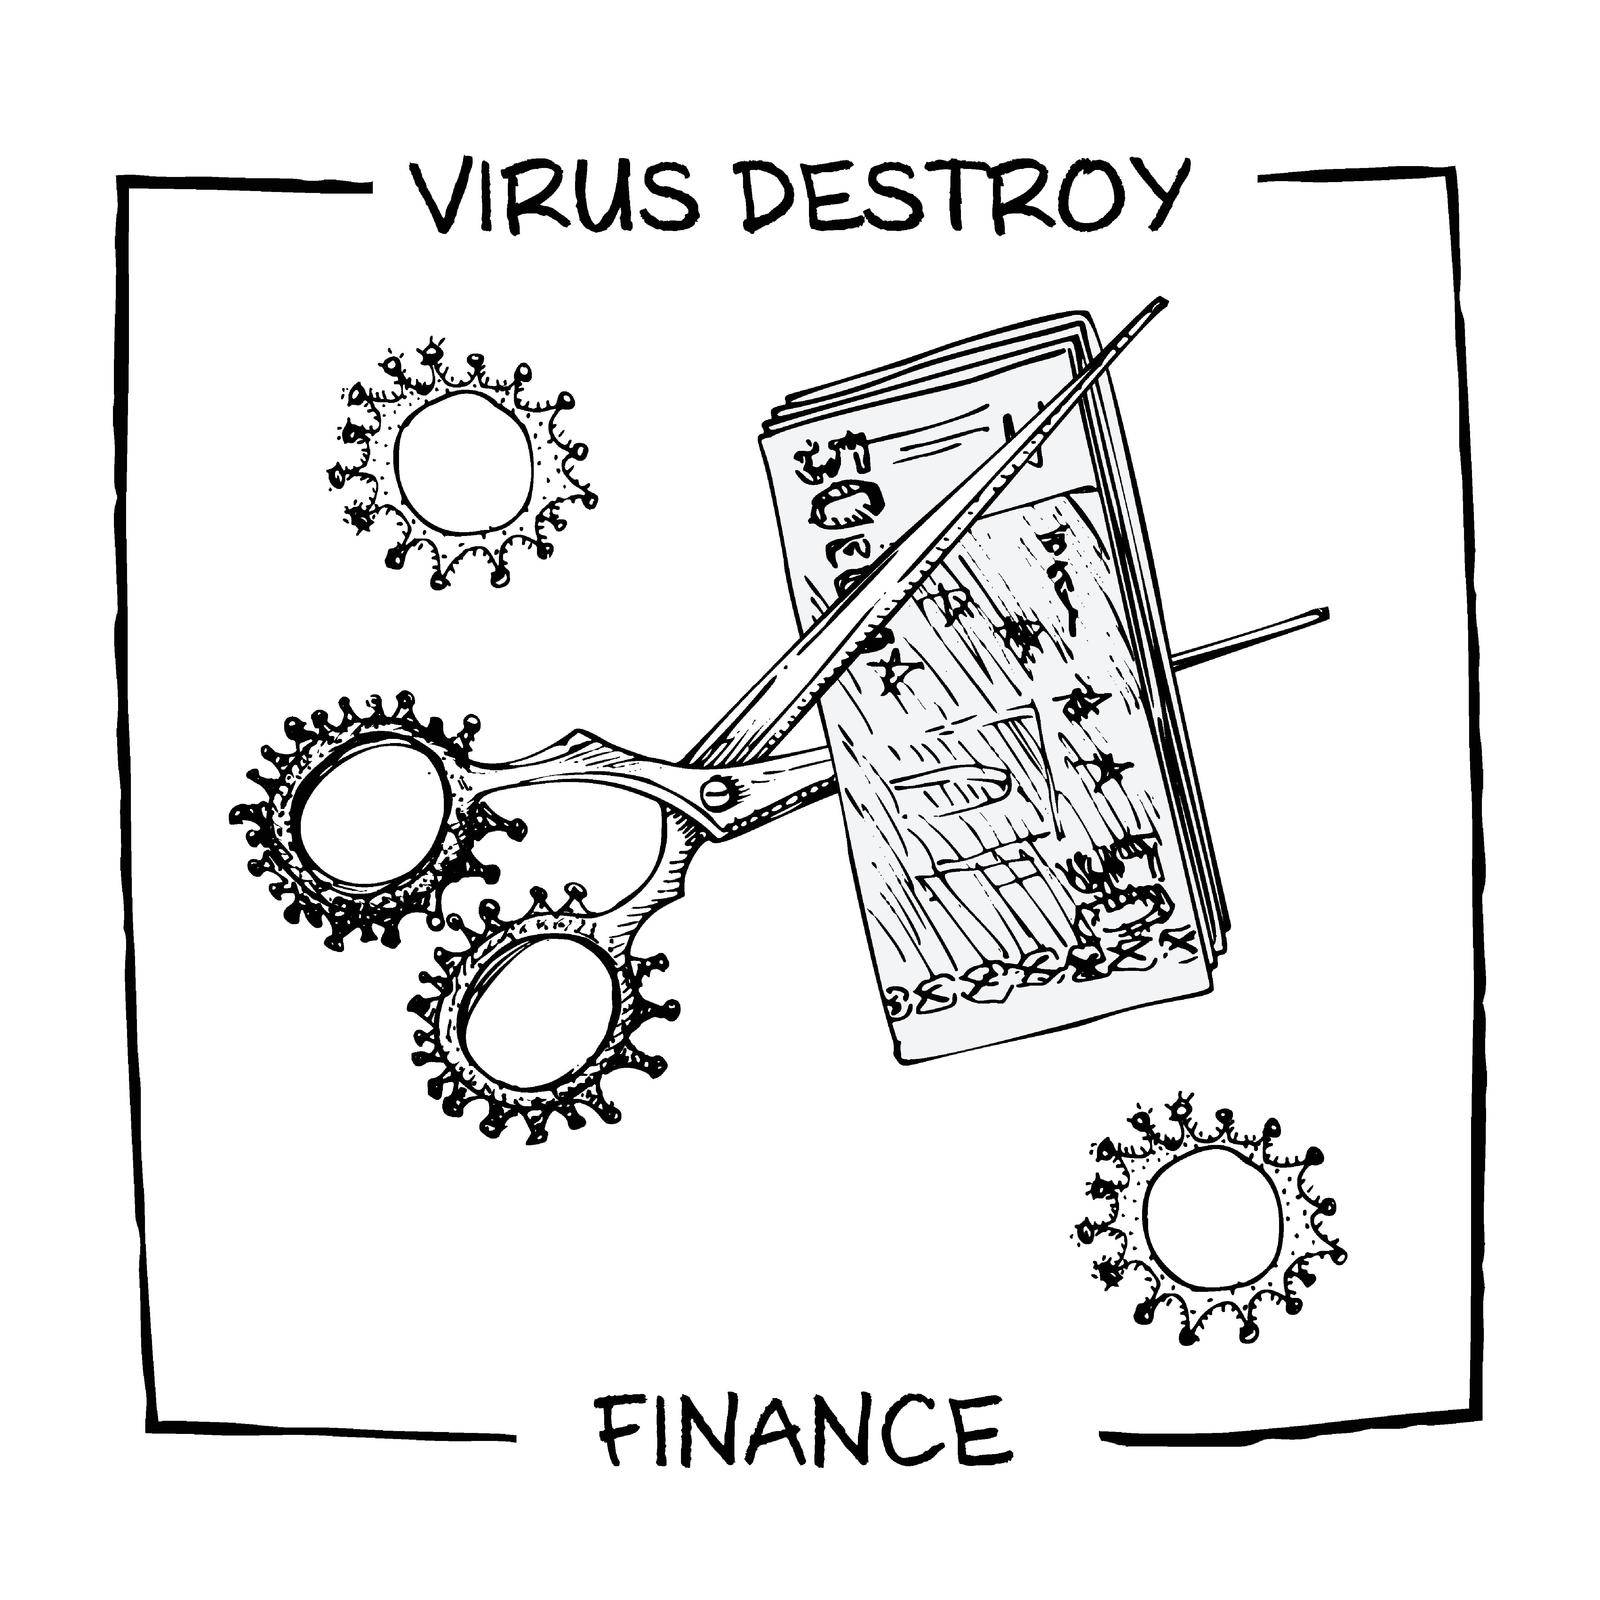 Poster against coronavirus epidemic with text virus destroy finance. Design concept for economic and financial information projects. Scissors cut money. Sketch style. by zimages